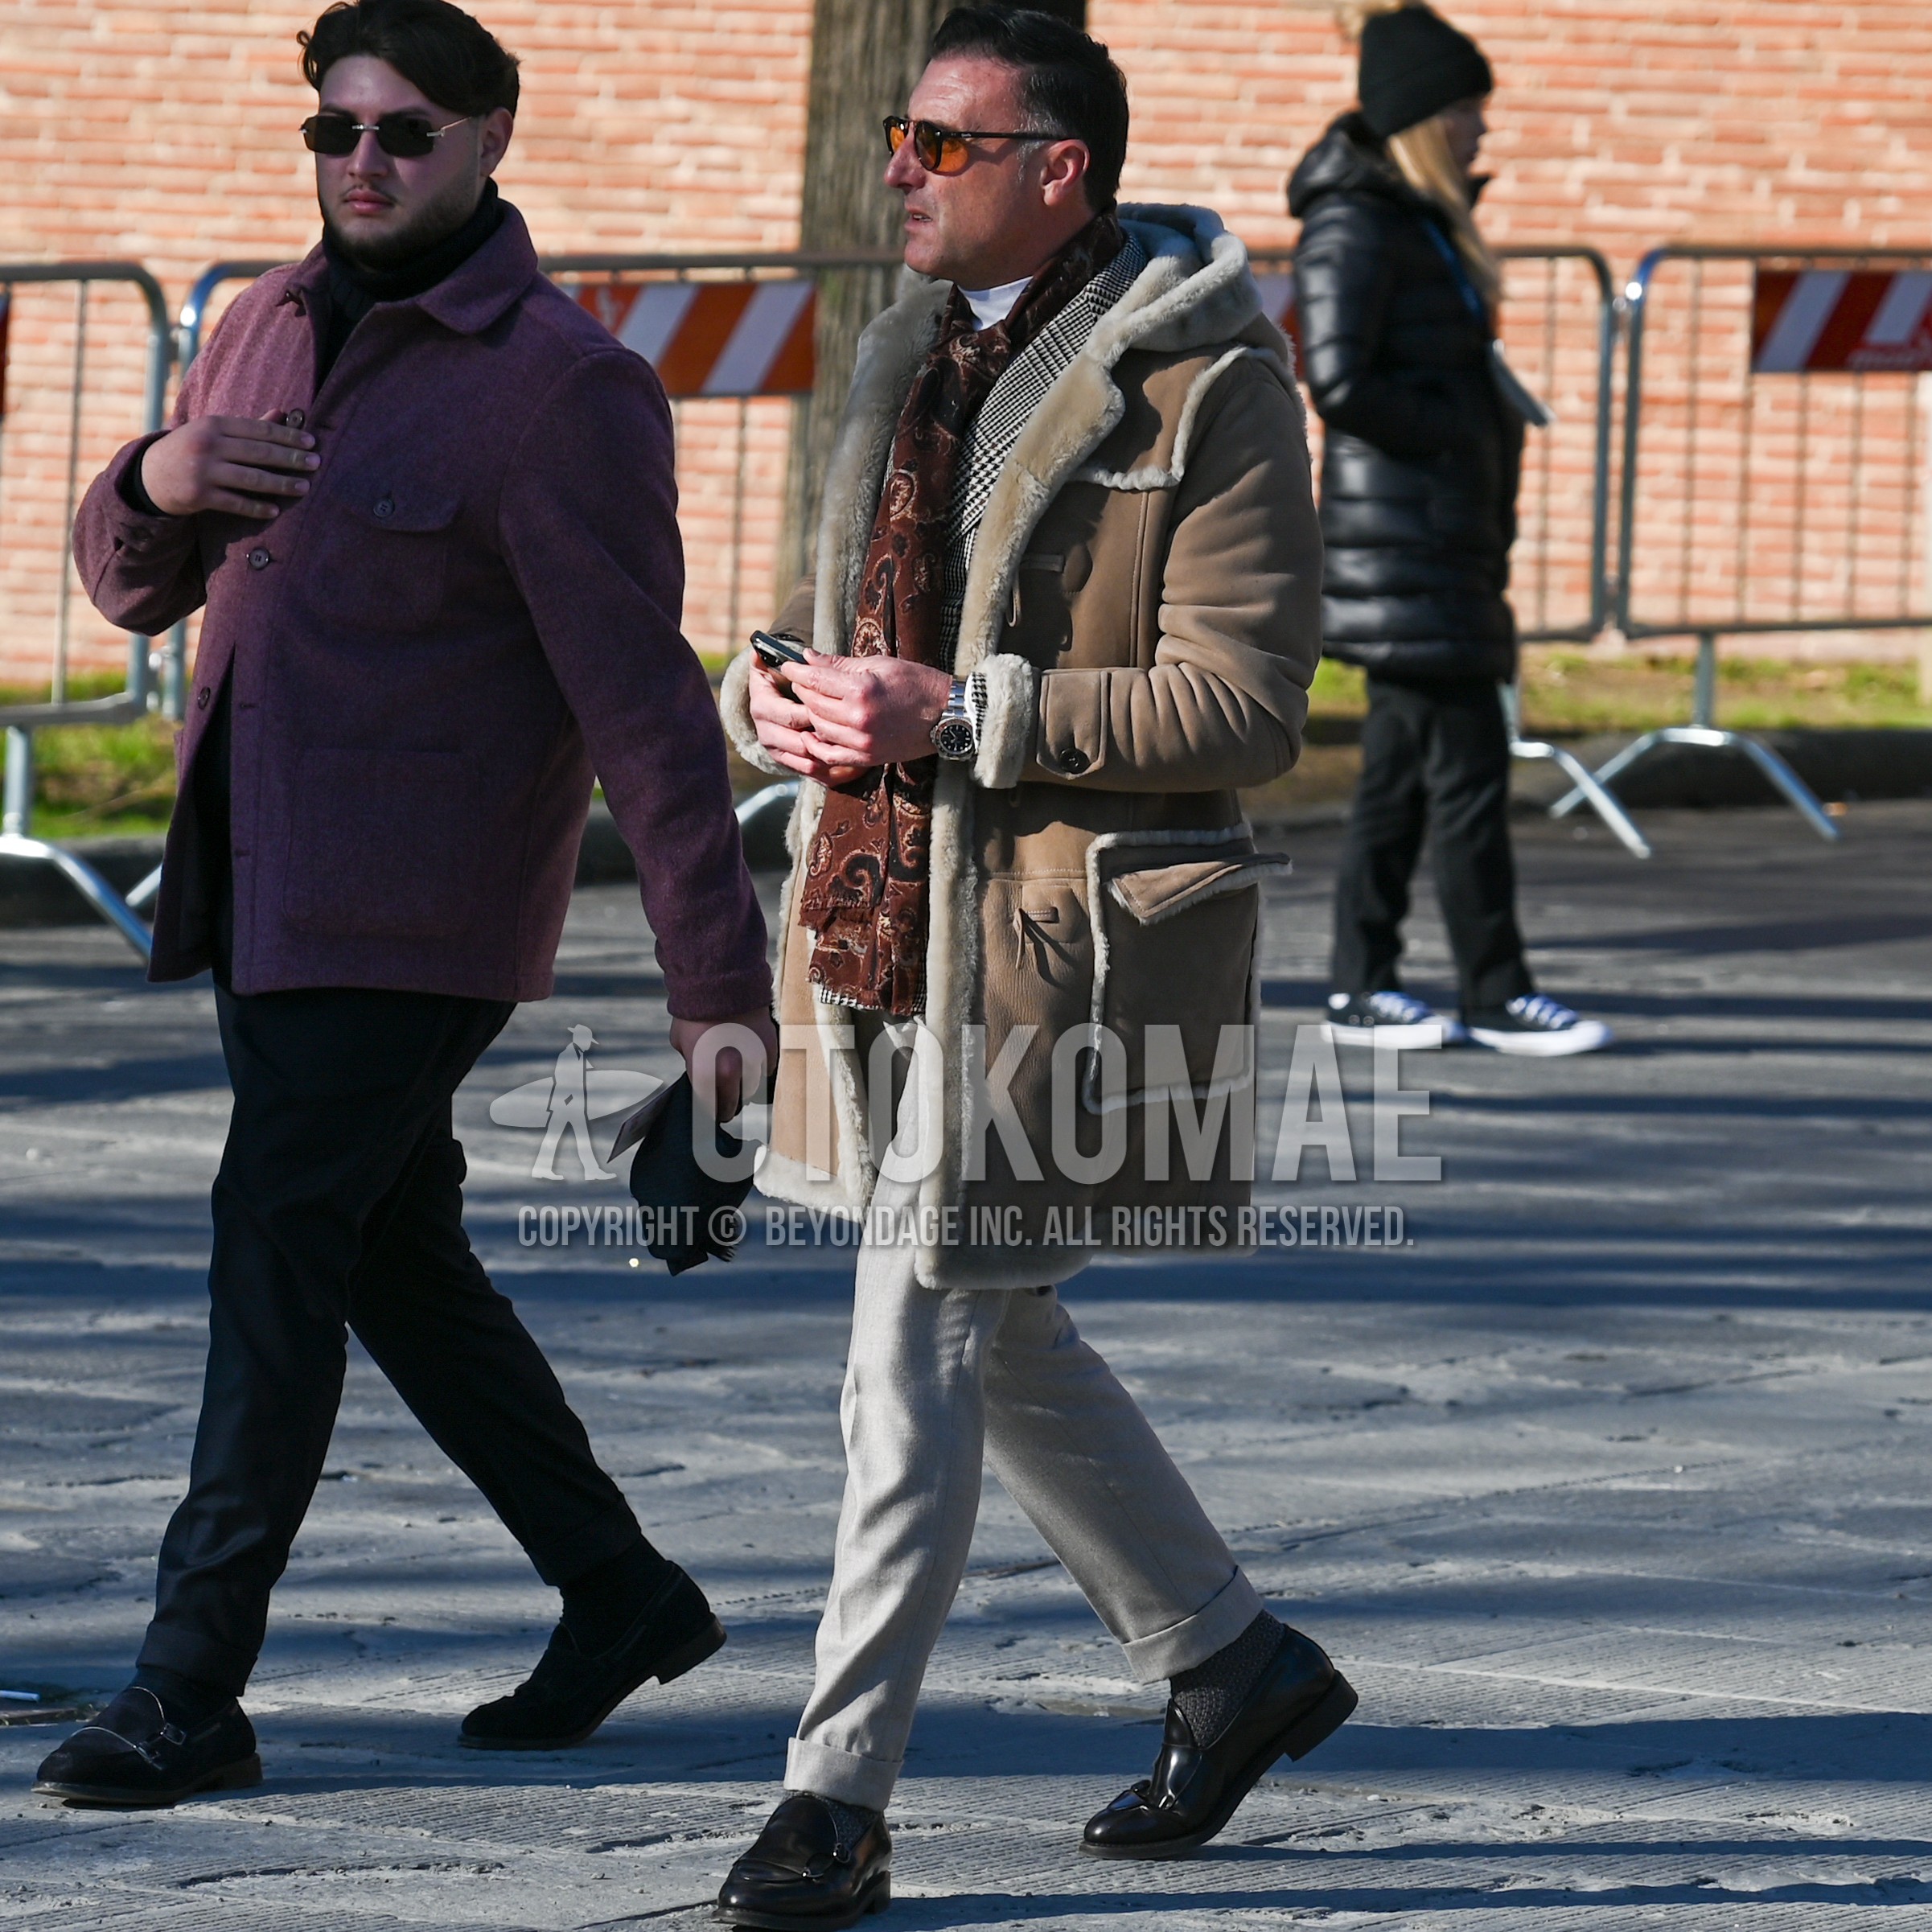 Men's winter outfit with black plain sunglasses, red plain scarf, beige plain boa jacket / coat, gray check tailored jacket, white plain turtleneck knit, beige plain slacks, gray plain socks, black tassel loafers leather shoes.